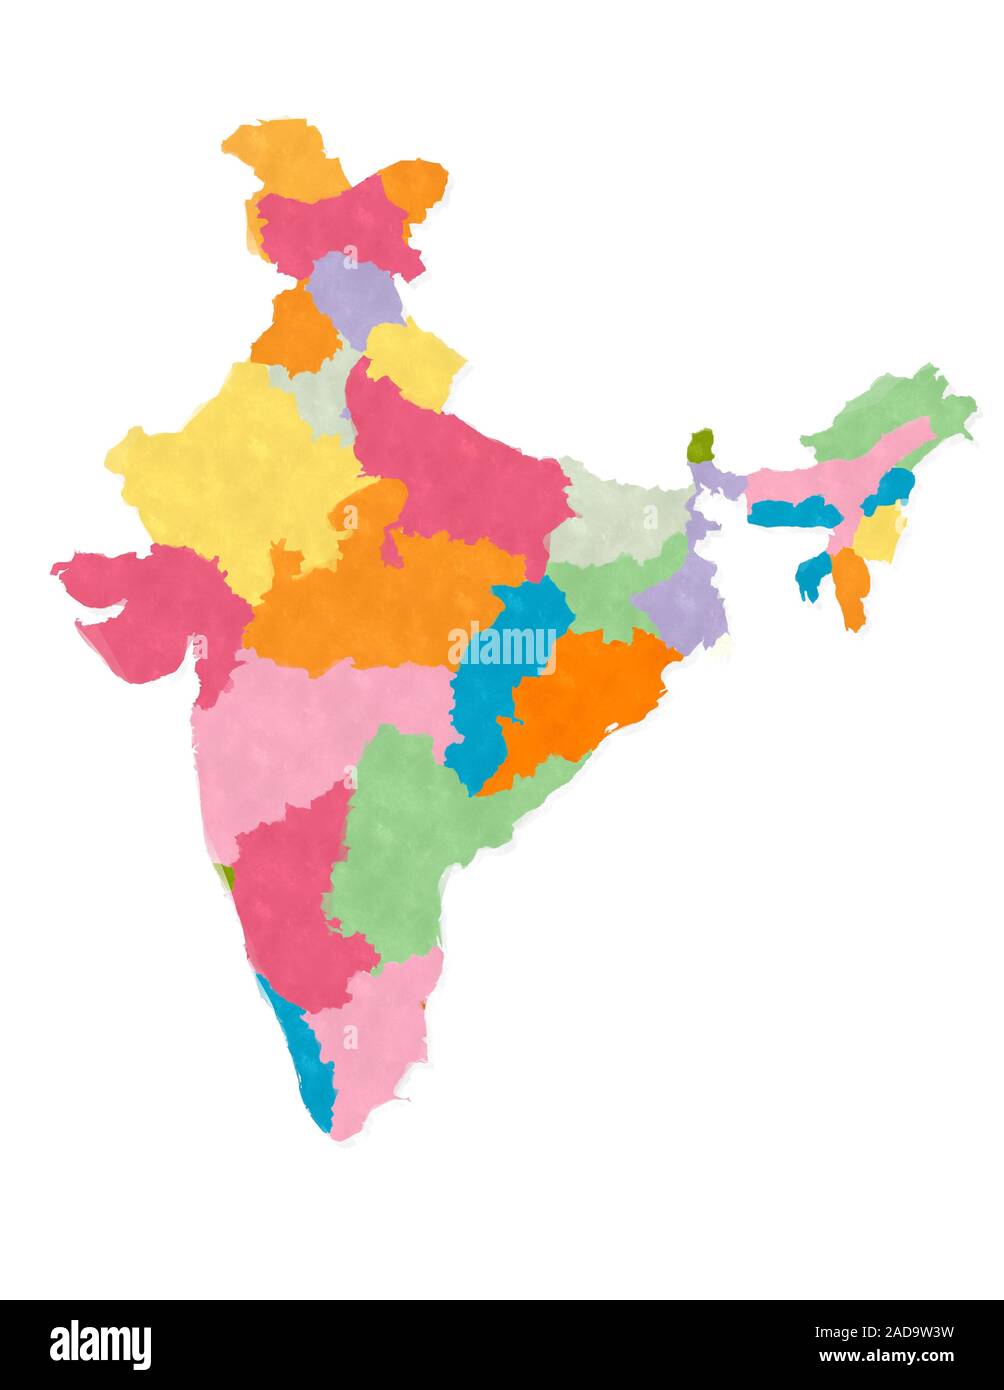 India map in watercolors Stock Photo